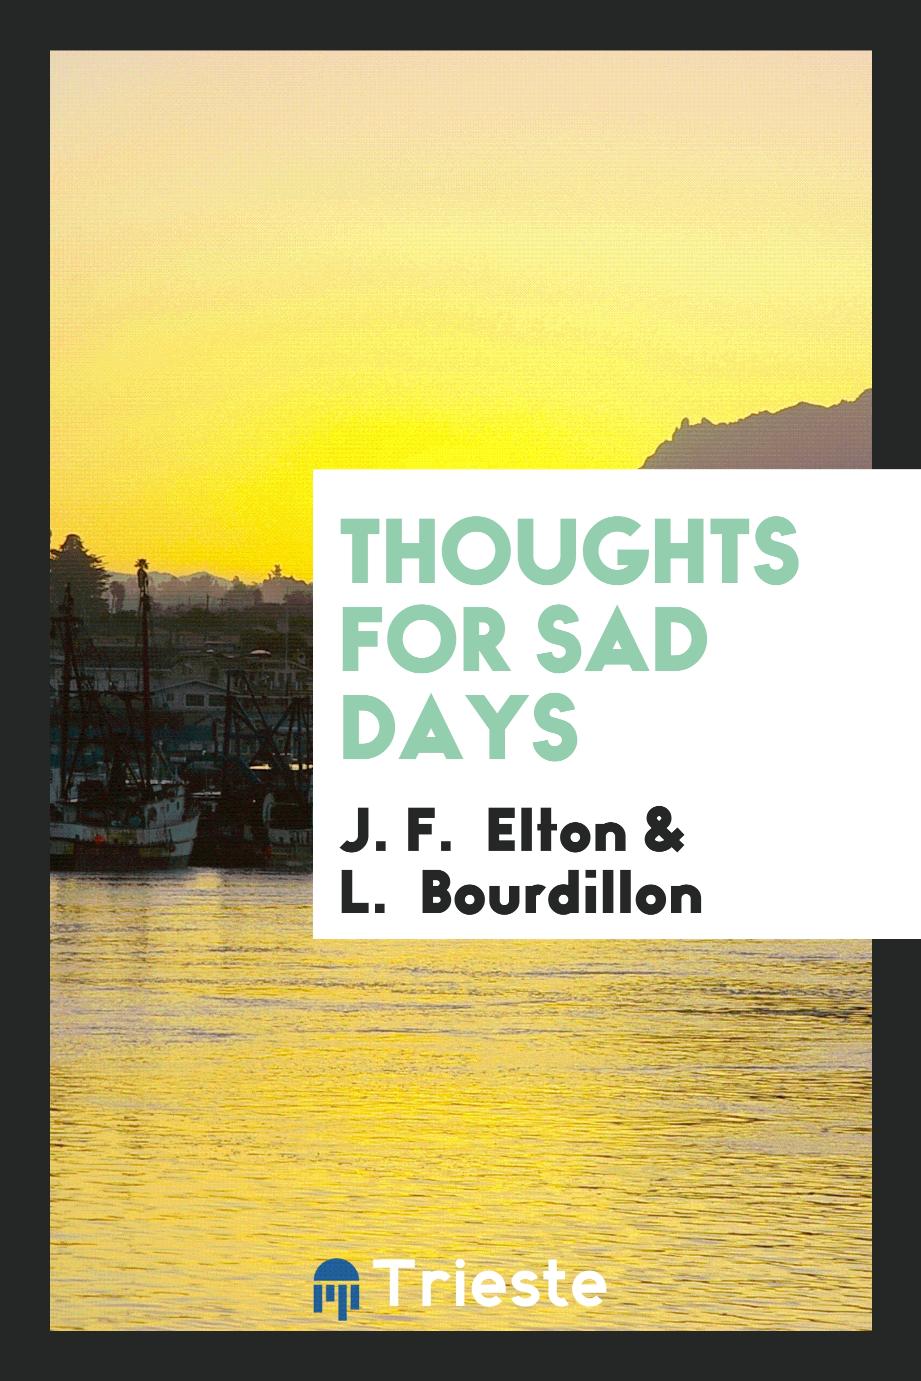 Thoughts for Sad Days